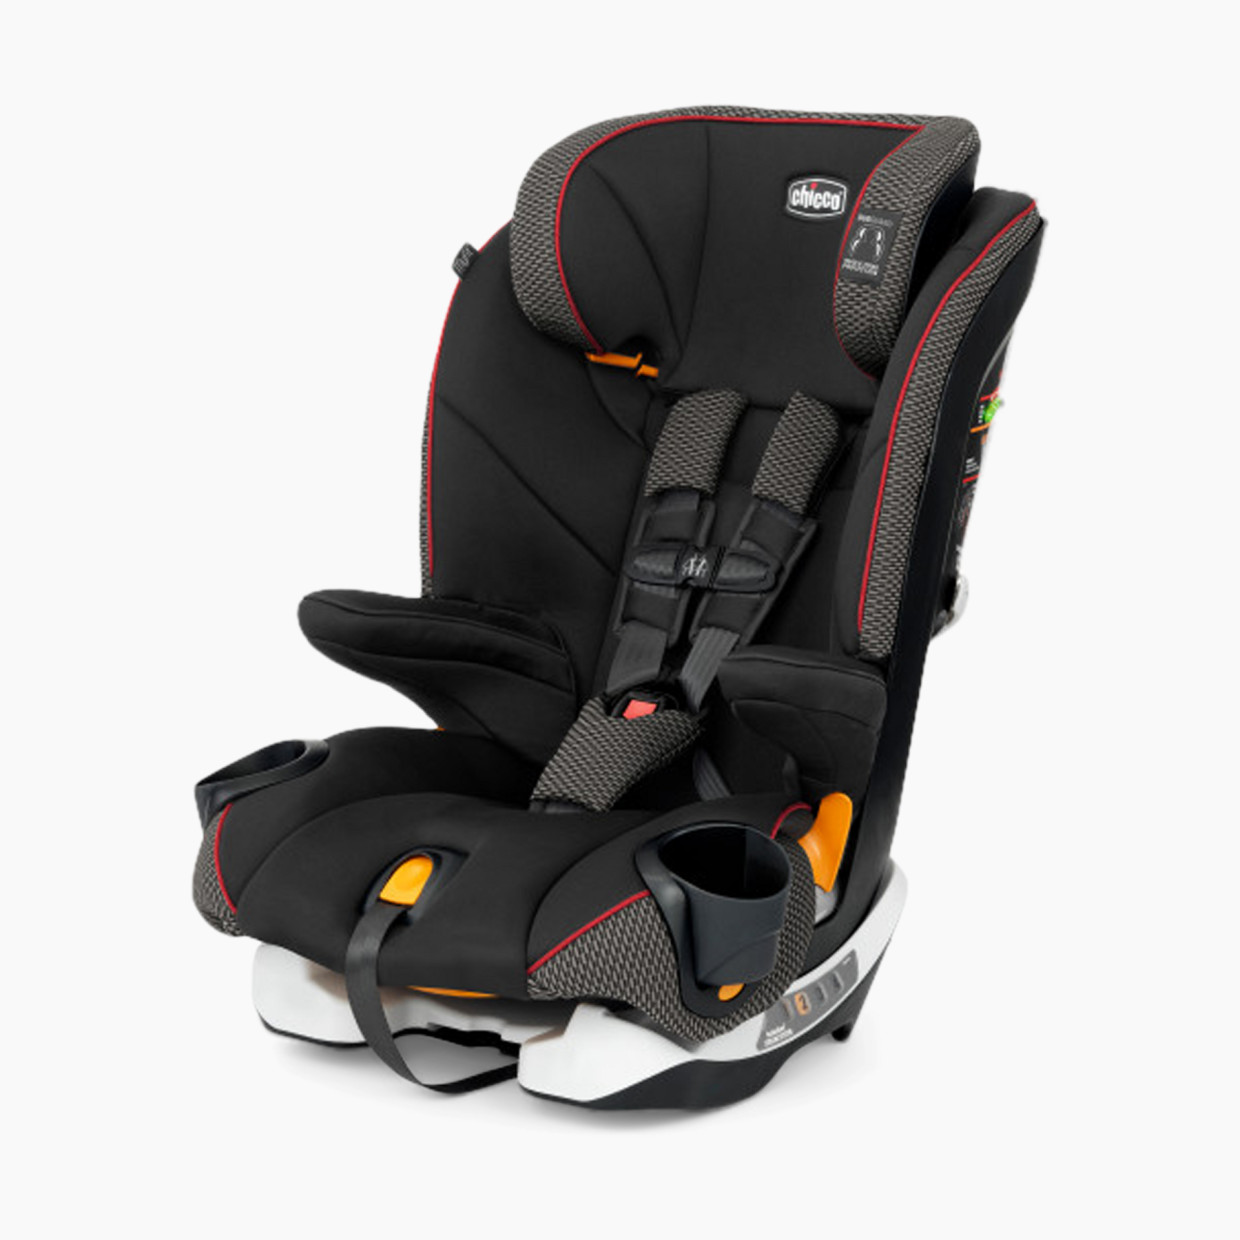 Chicco MyFit Harness + Booster Car Seat - Atmosphere.